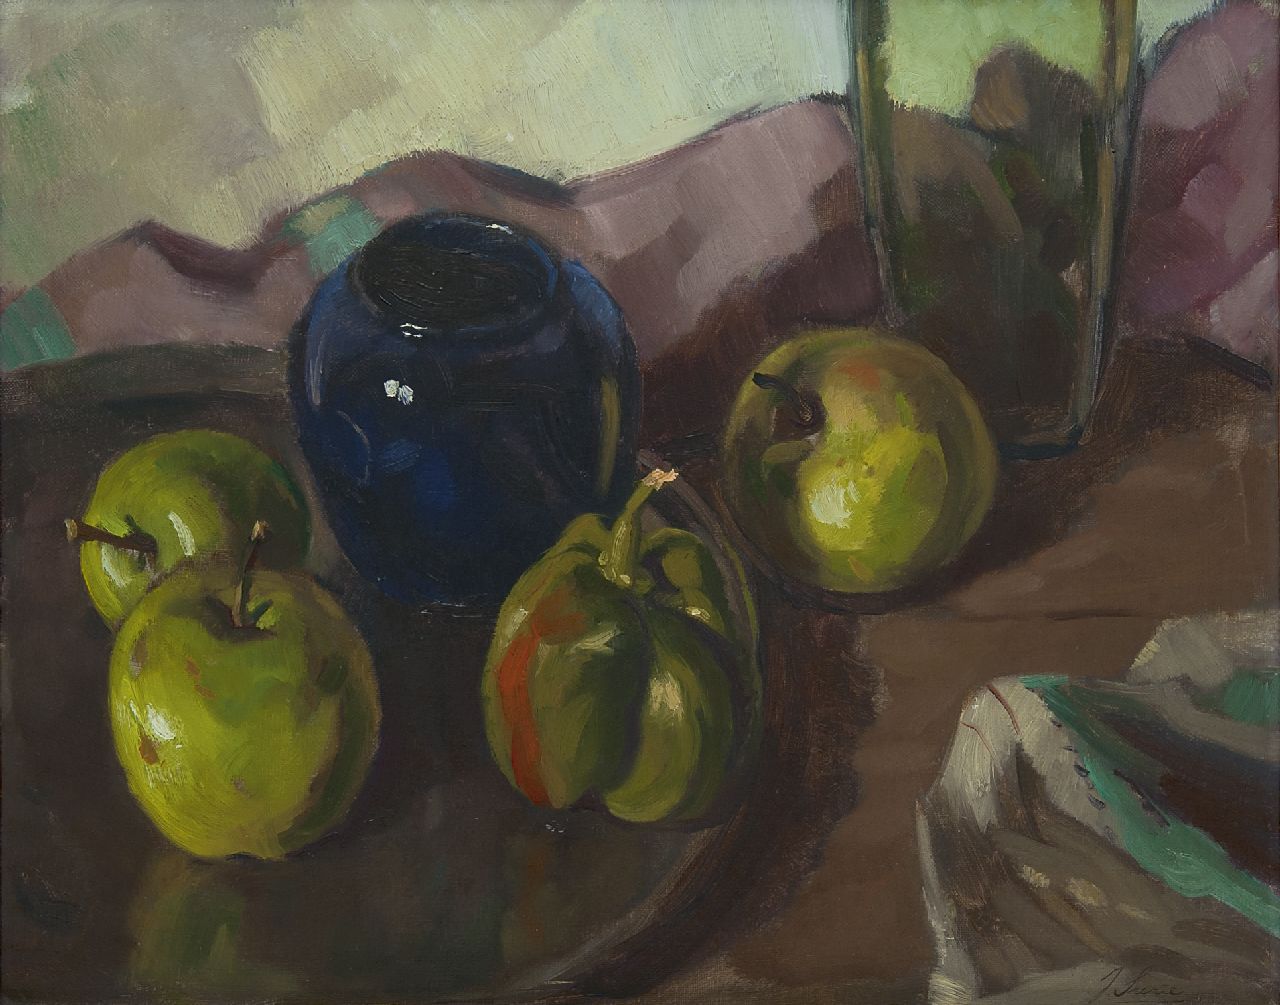 Surie J.  | Jacoba 'Coba' Surie, Plate with apples and paprika, oil on canvas 40.7 x 50.5 cm, signed l.r.